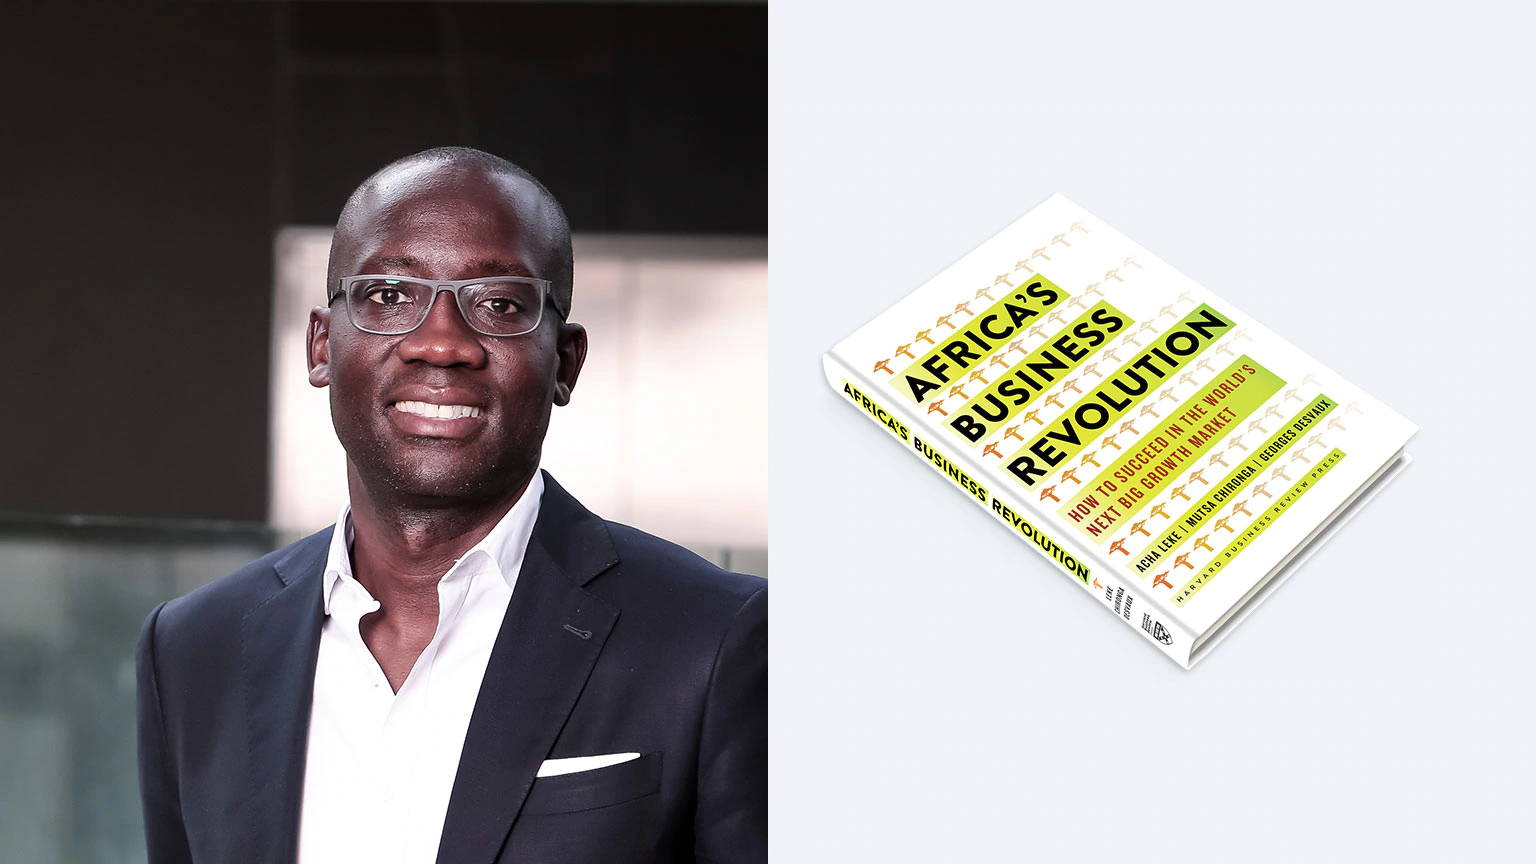 Meet Acha Leke, author of a new guide to succeeding in business in Africa